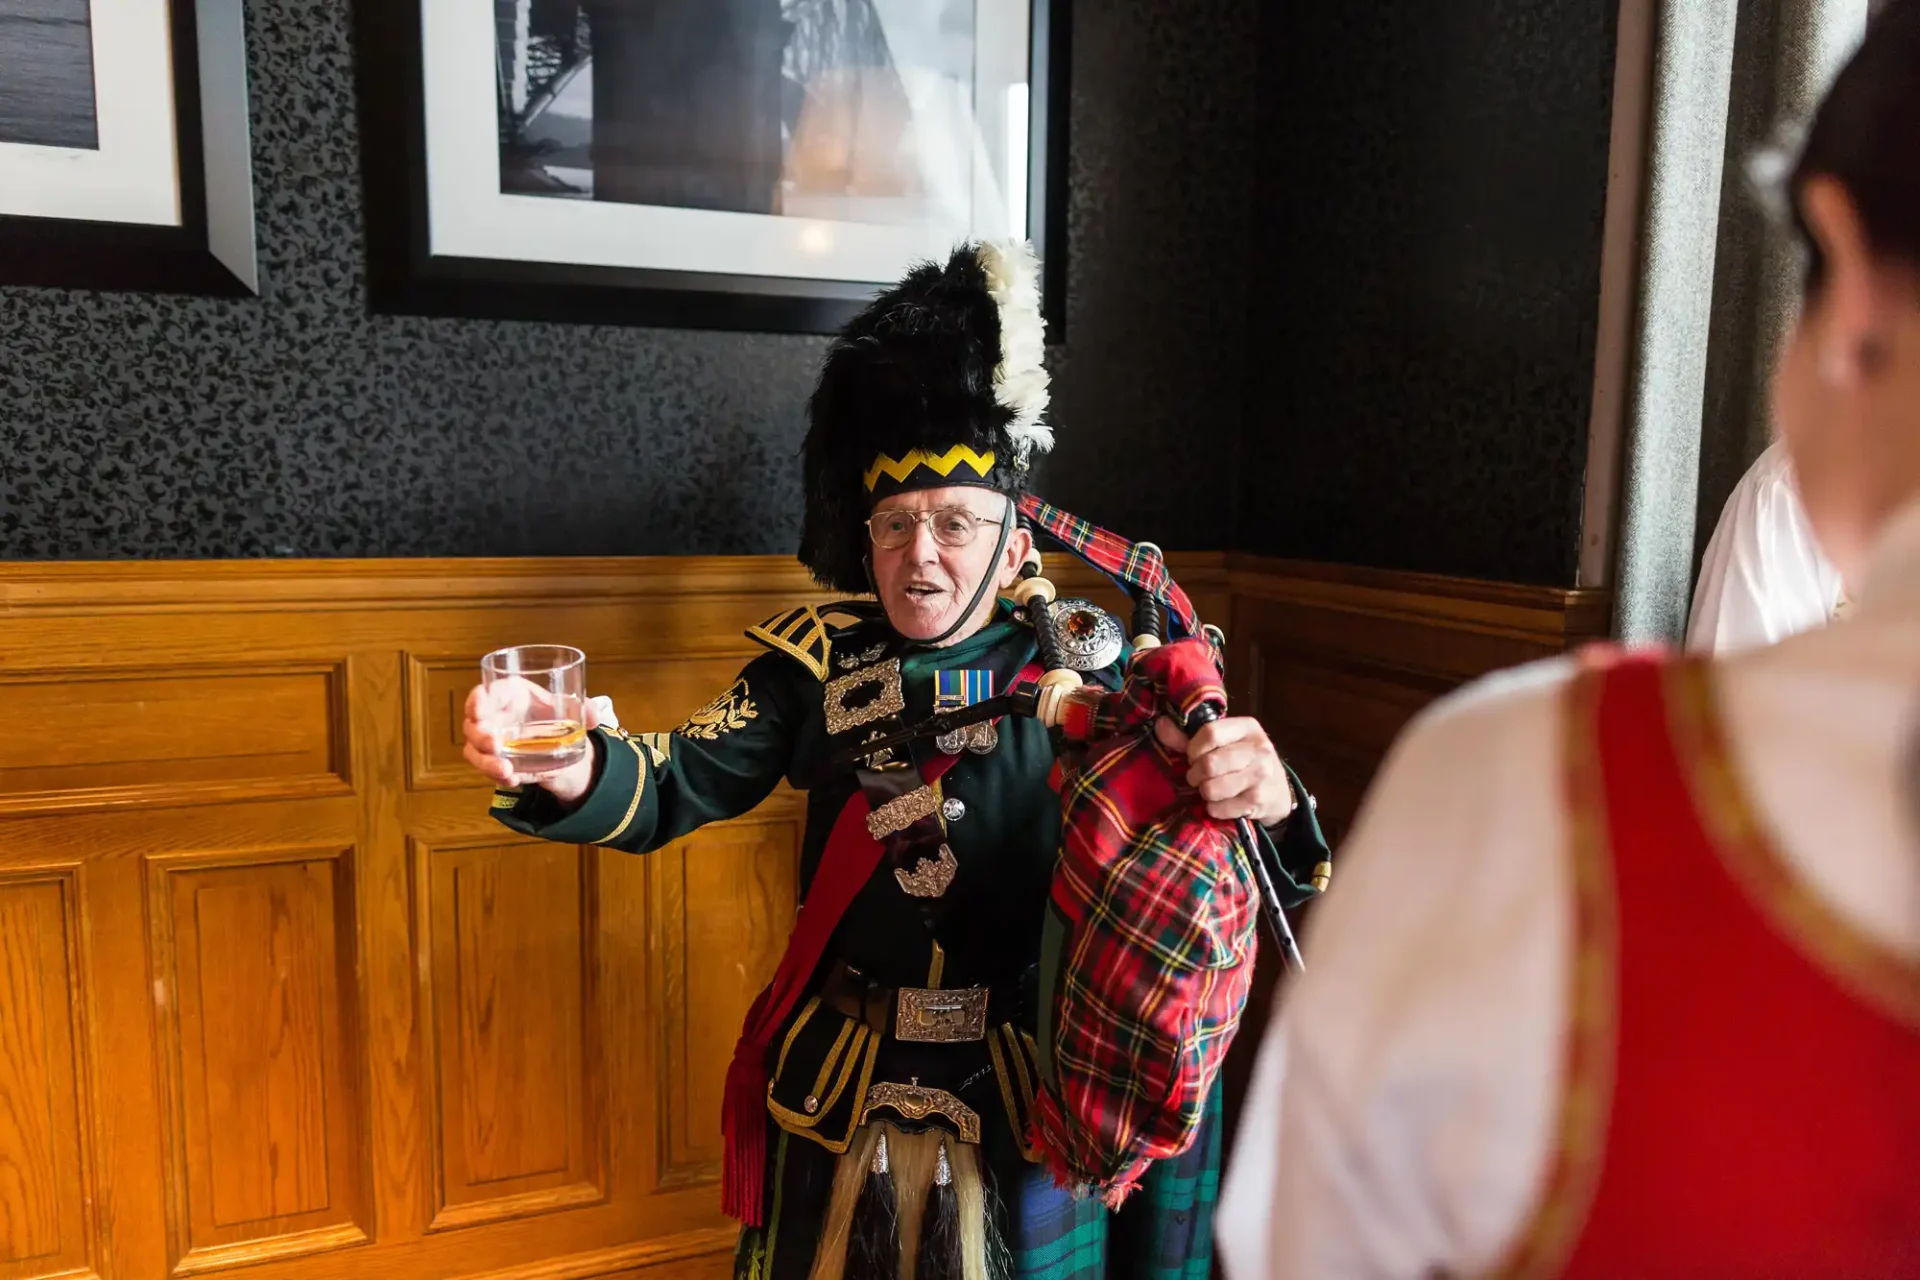 Man in traditional scottish attire, including kilt and sporran, holding a glass of whiskey, in a room with wood-paneled walls and framed photos.